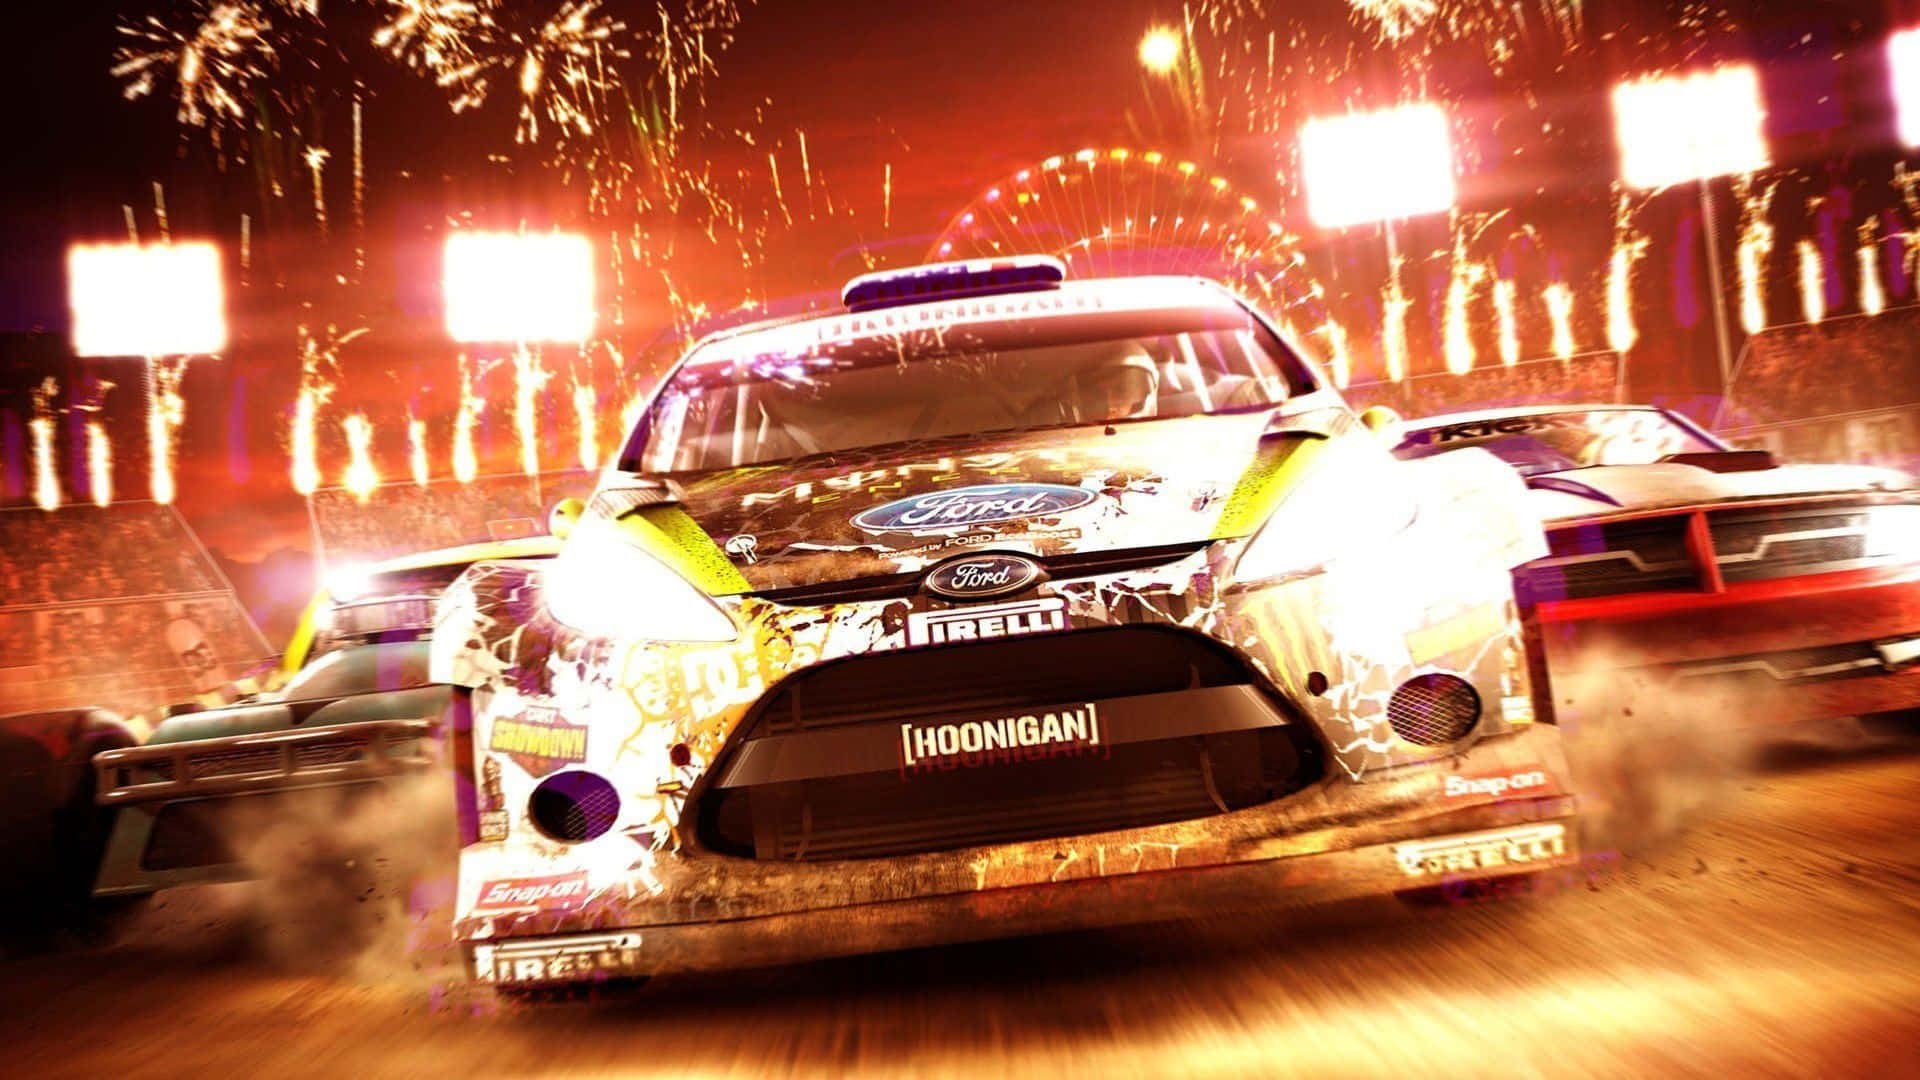 Take a Ride in Dirt 3!